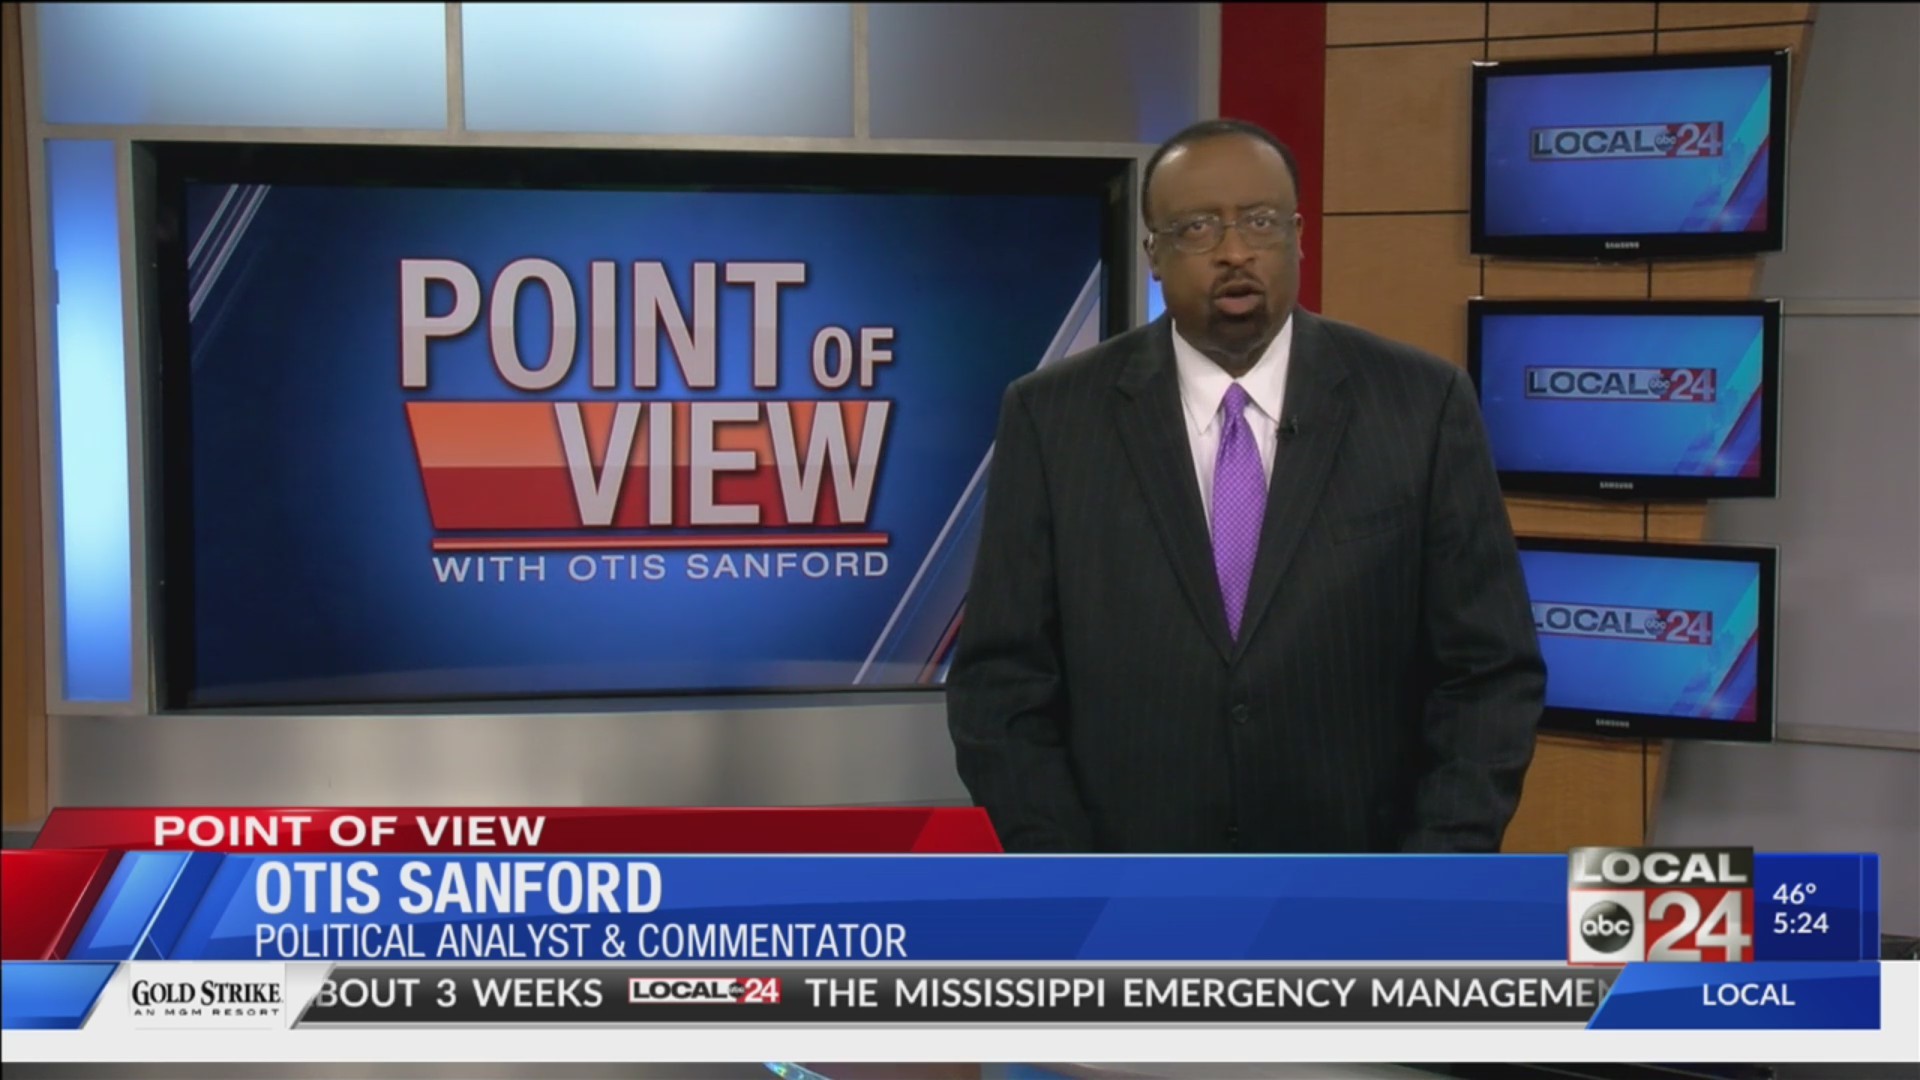 Point of View with political analyst and commentator Otis Sanford on St. Jude Children’s Research Hospital